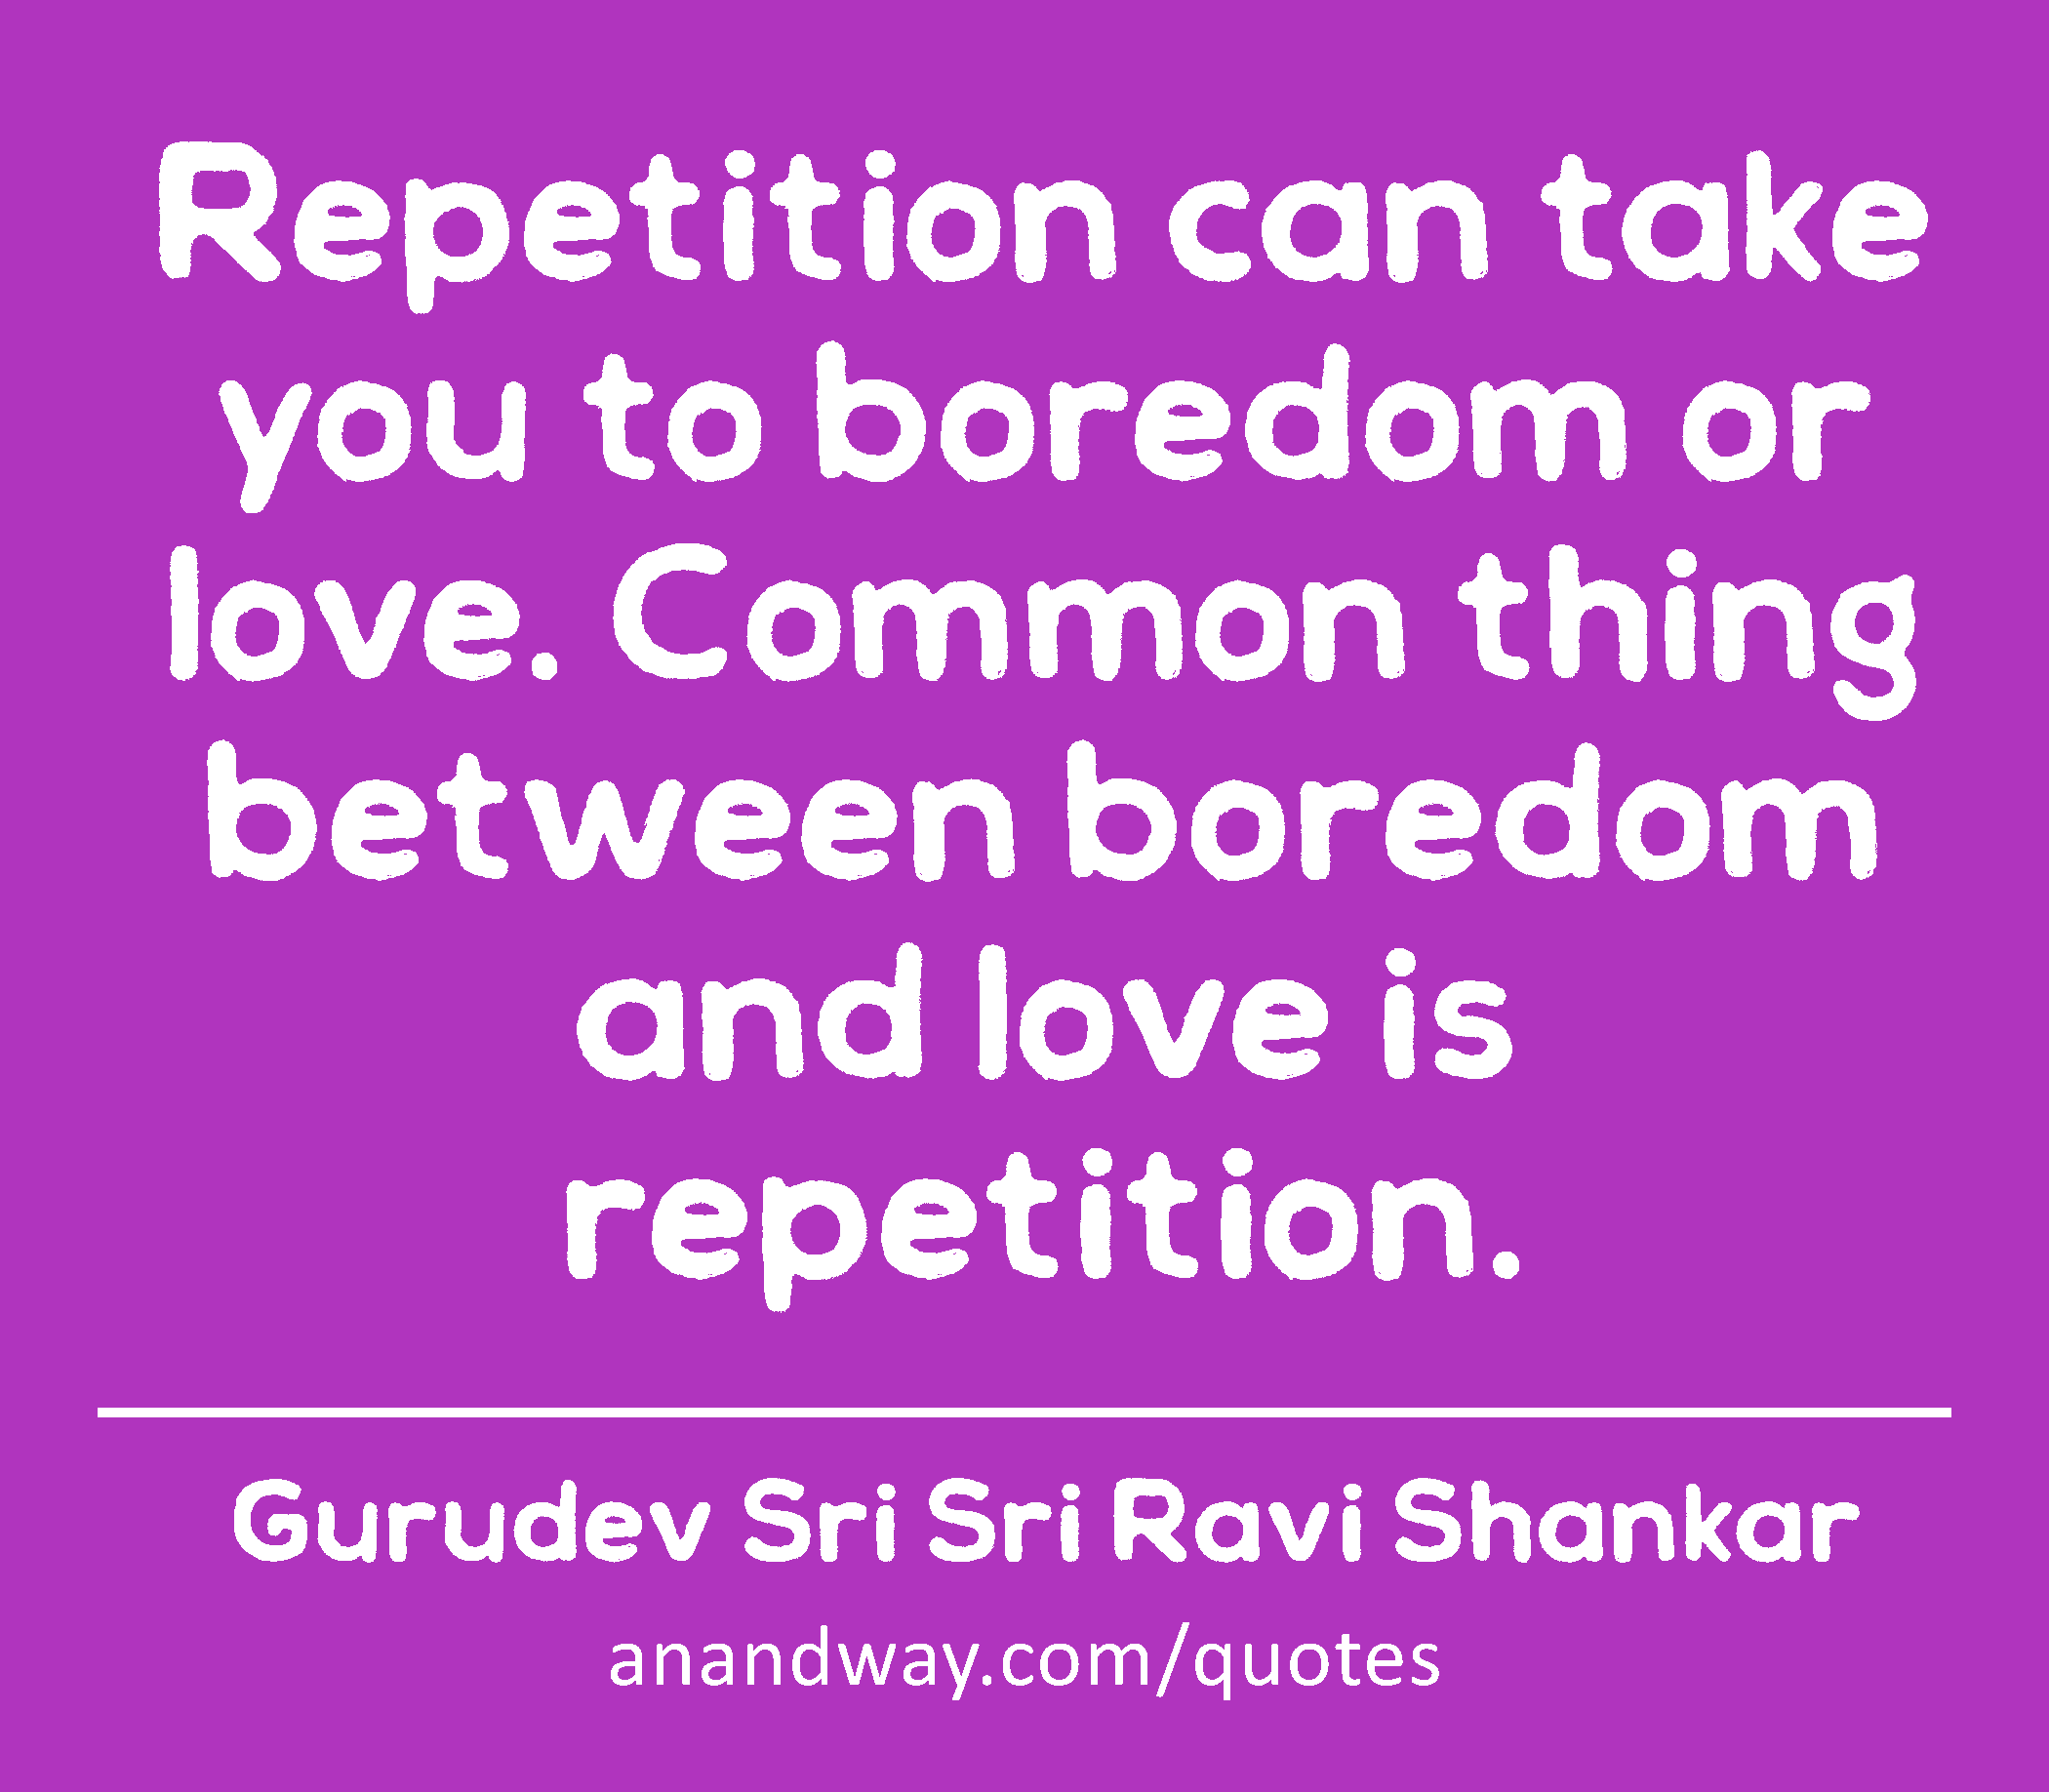 Repetition can take you to boredom or love. Common thing between boredom and love is repetition. 
 -Gurudev Sri Sri Ravi Shankar